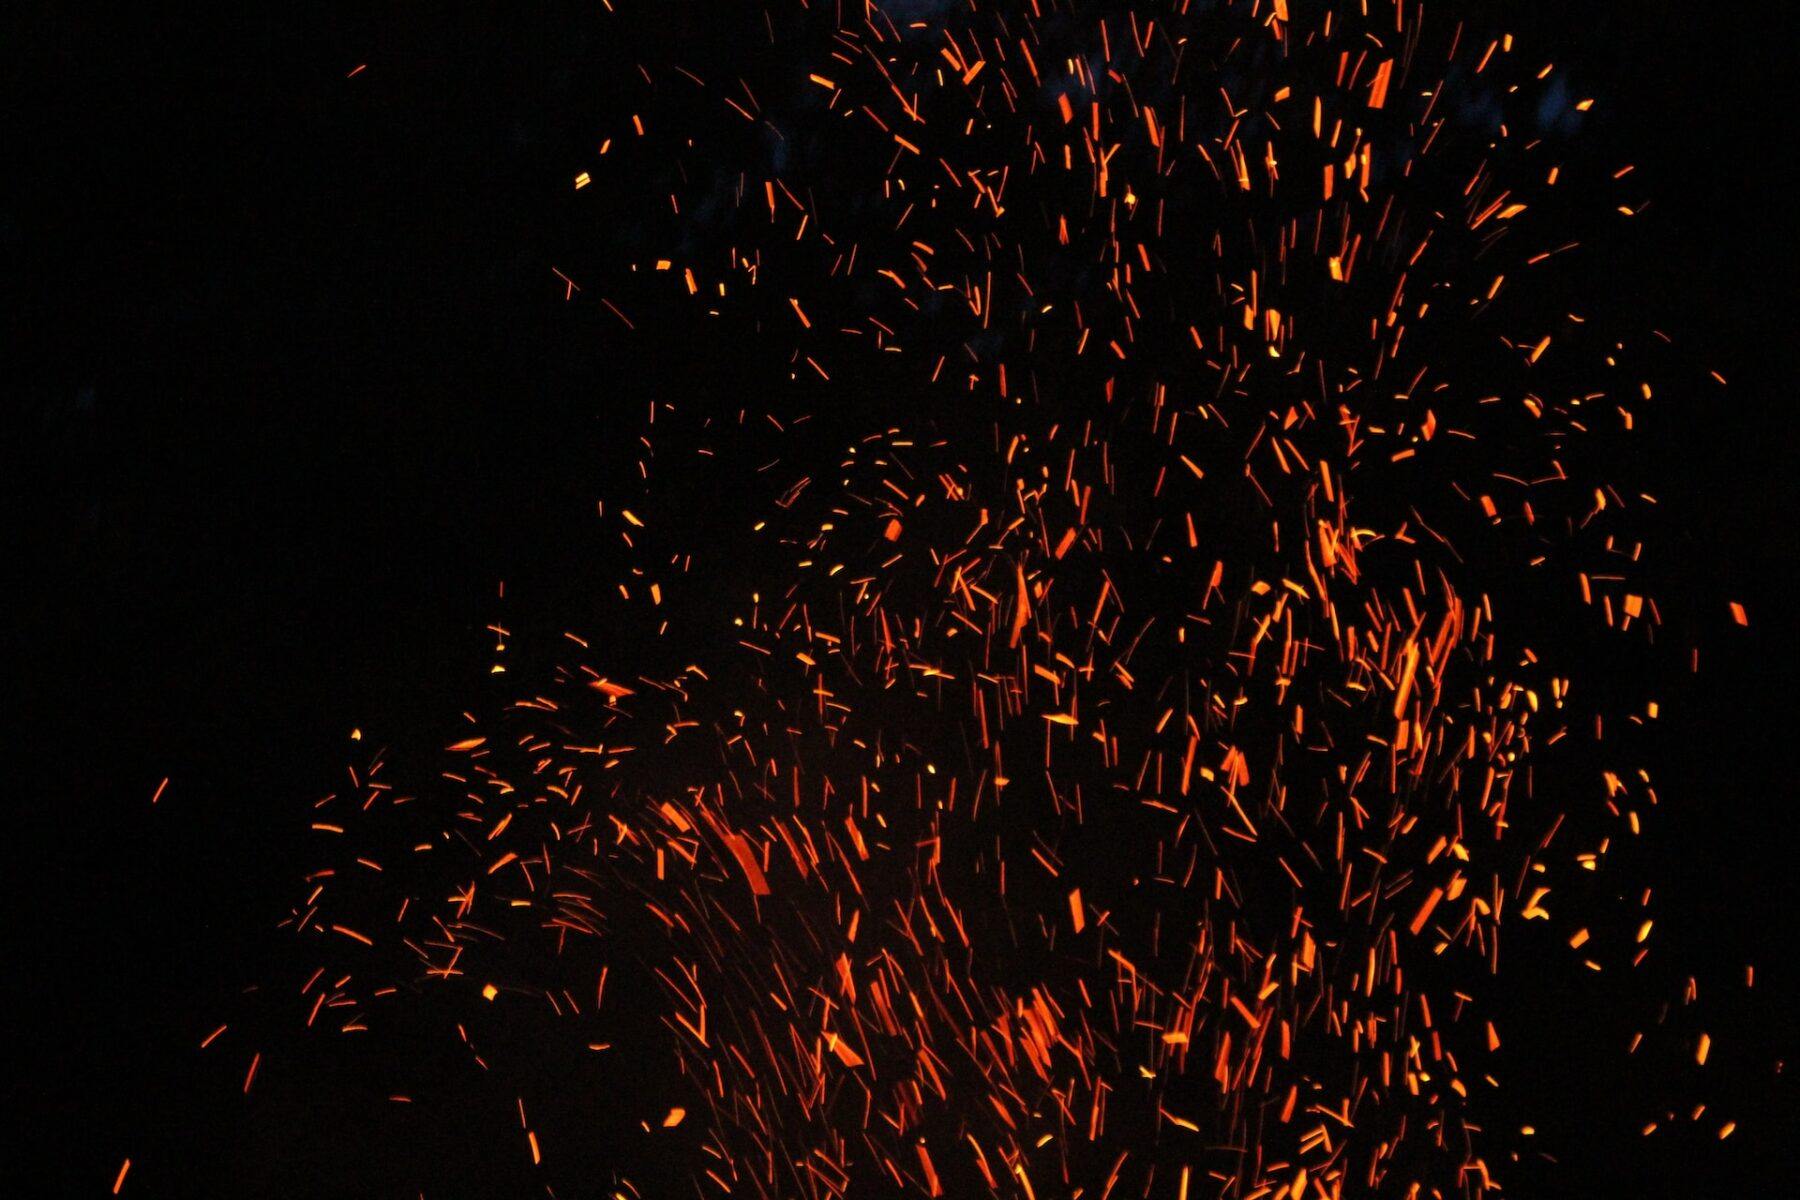 image of embers of a fire spitting up against a dark black sky